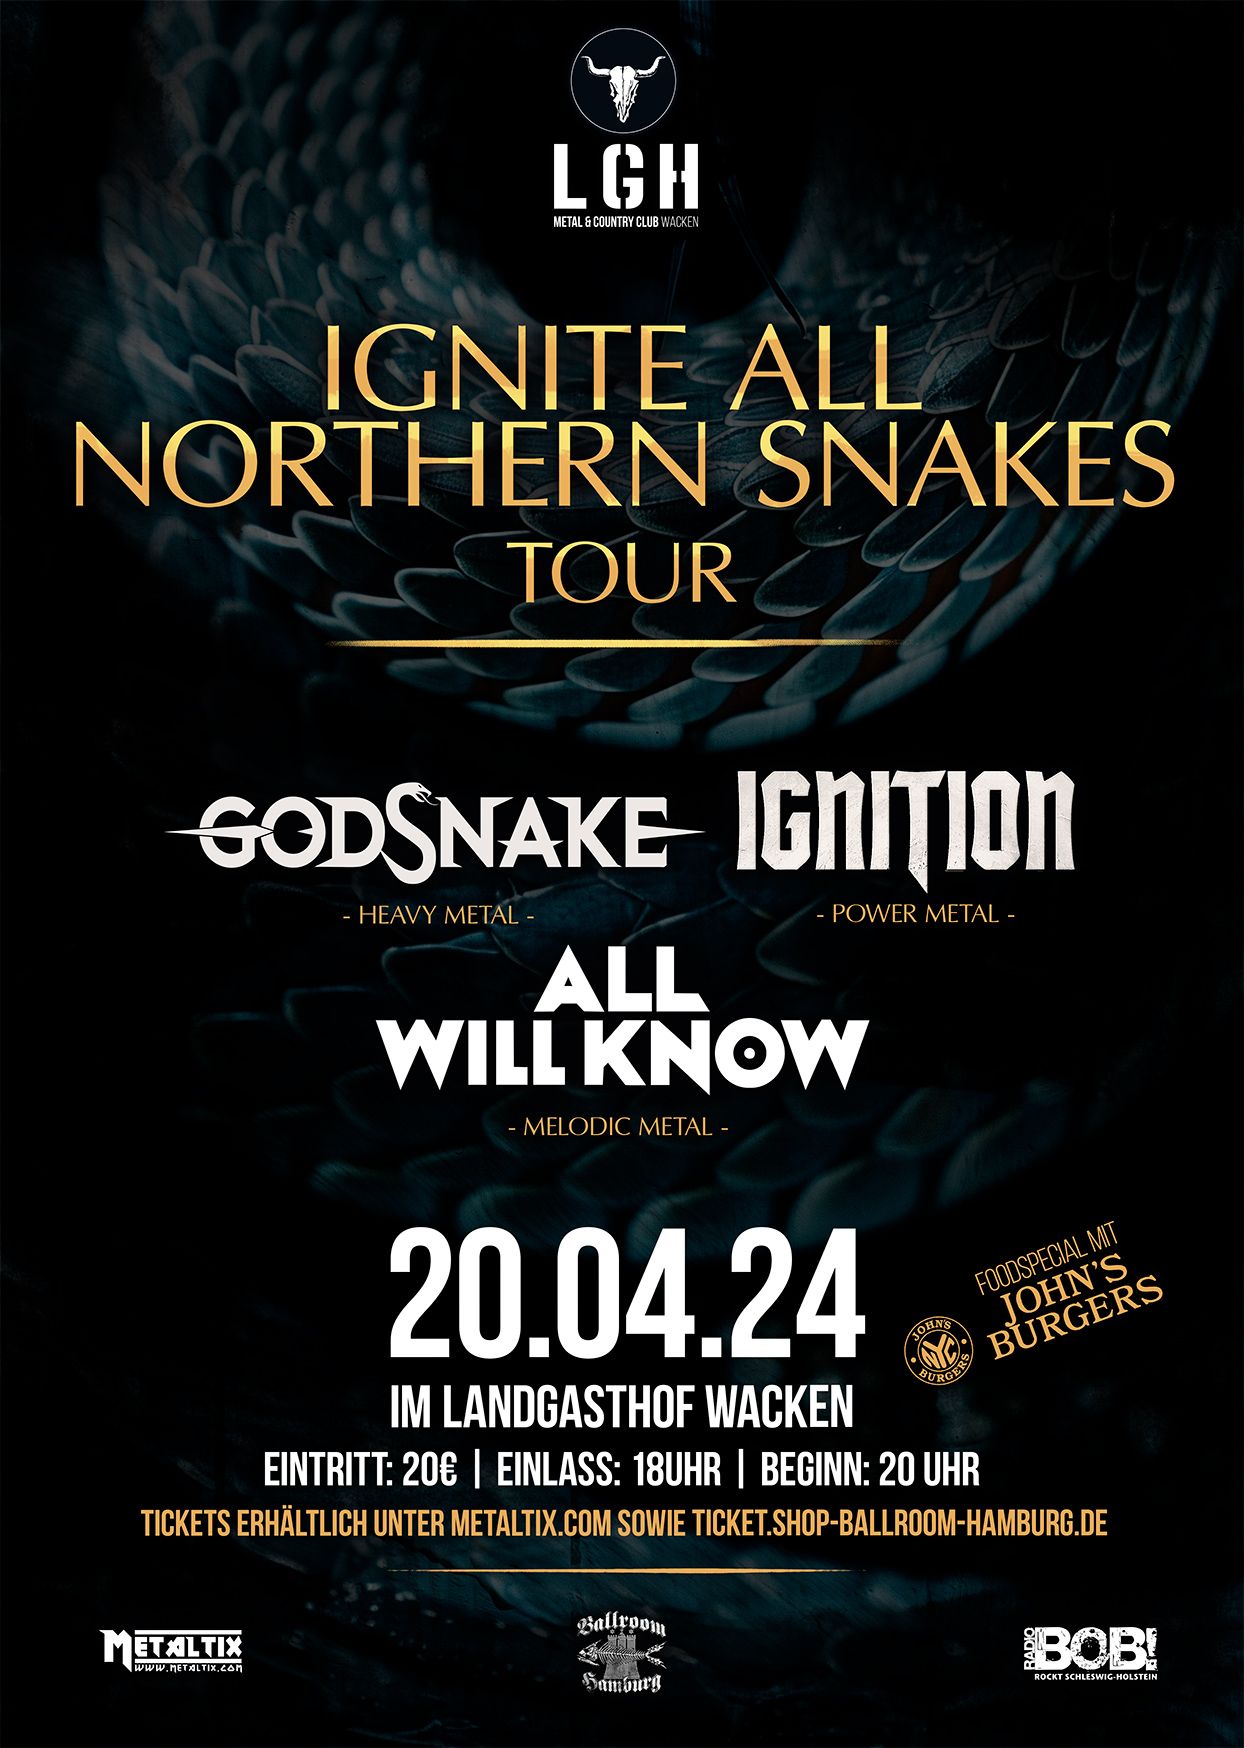 Ignite All Northern Snakes Tour mit GODSNAKE, IGNITION und ALL WILL KNOW